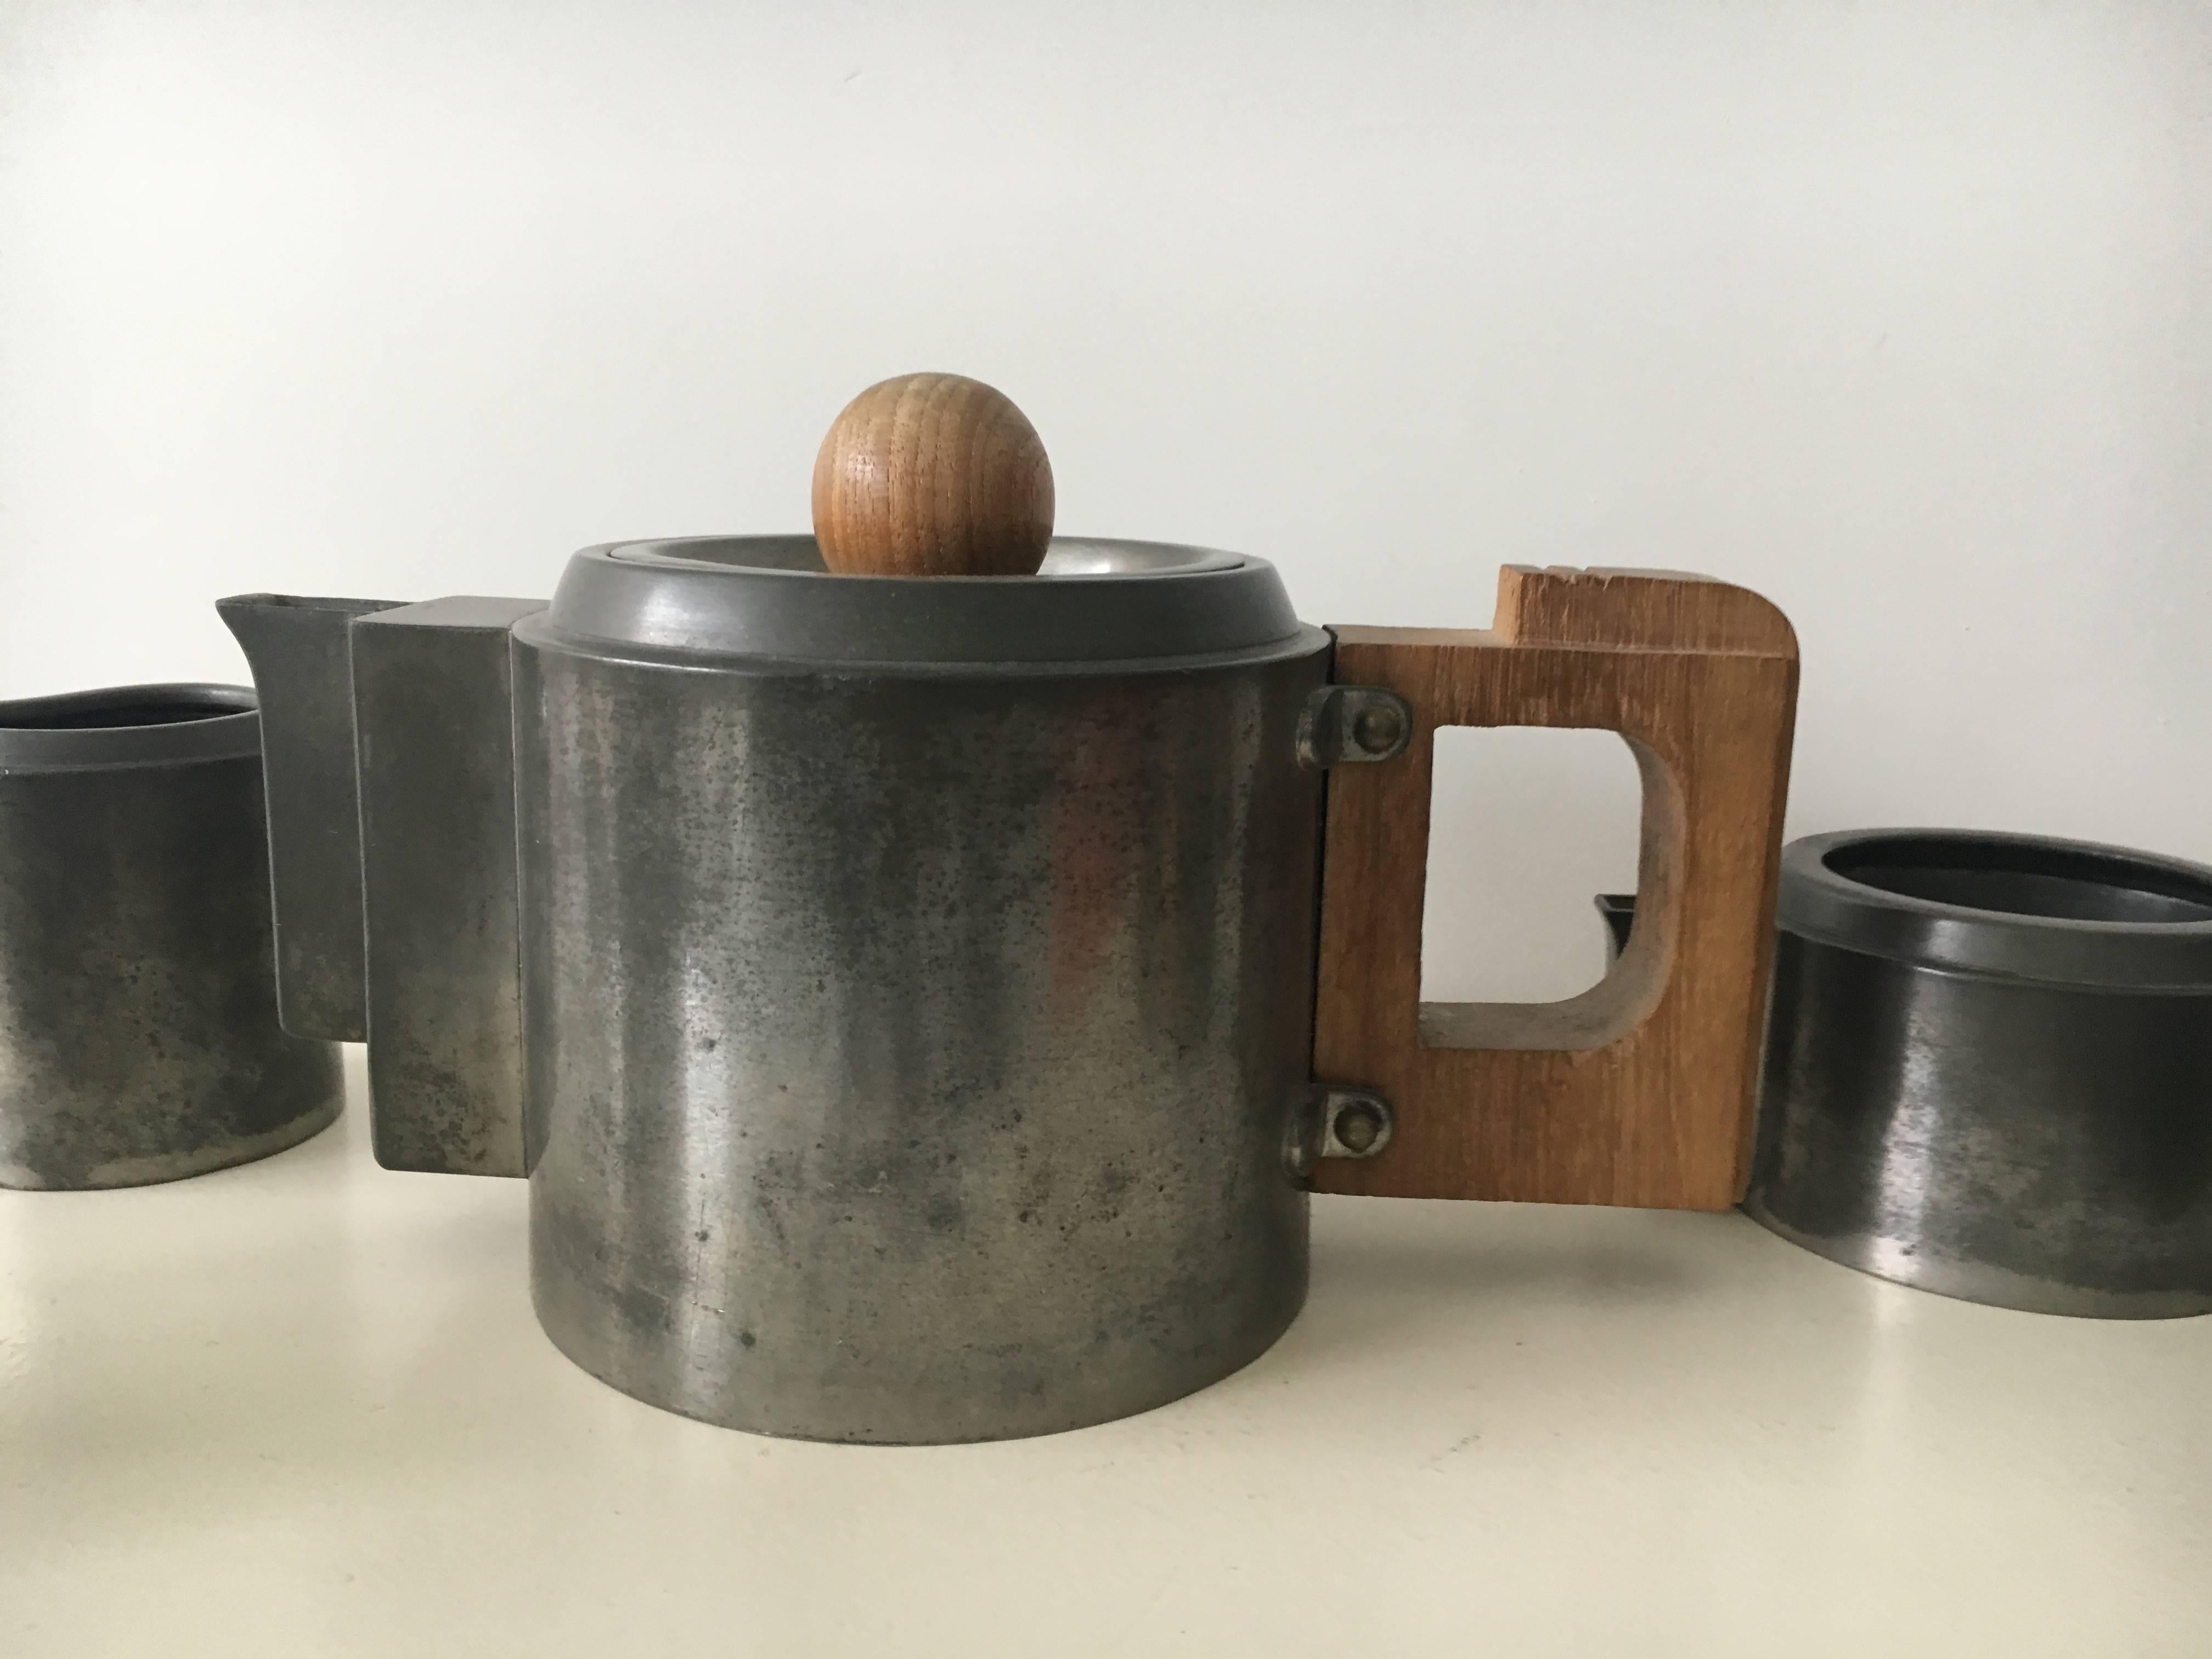 Dutch Art Deco tea service made by the firm Daalderop in Tiel.
The firm is known for the production of domestic ware in Art Nouveau, Art Deco
and Amsterdam School style in pewter. Founded in 1880 by J.N. Daalderop. The
pewter was imported from